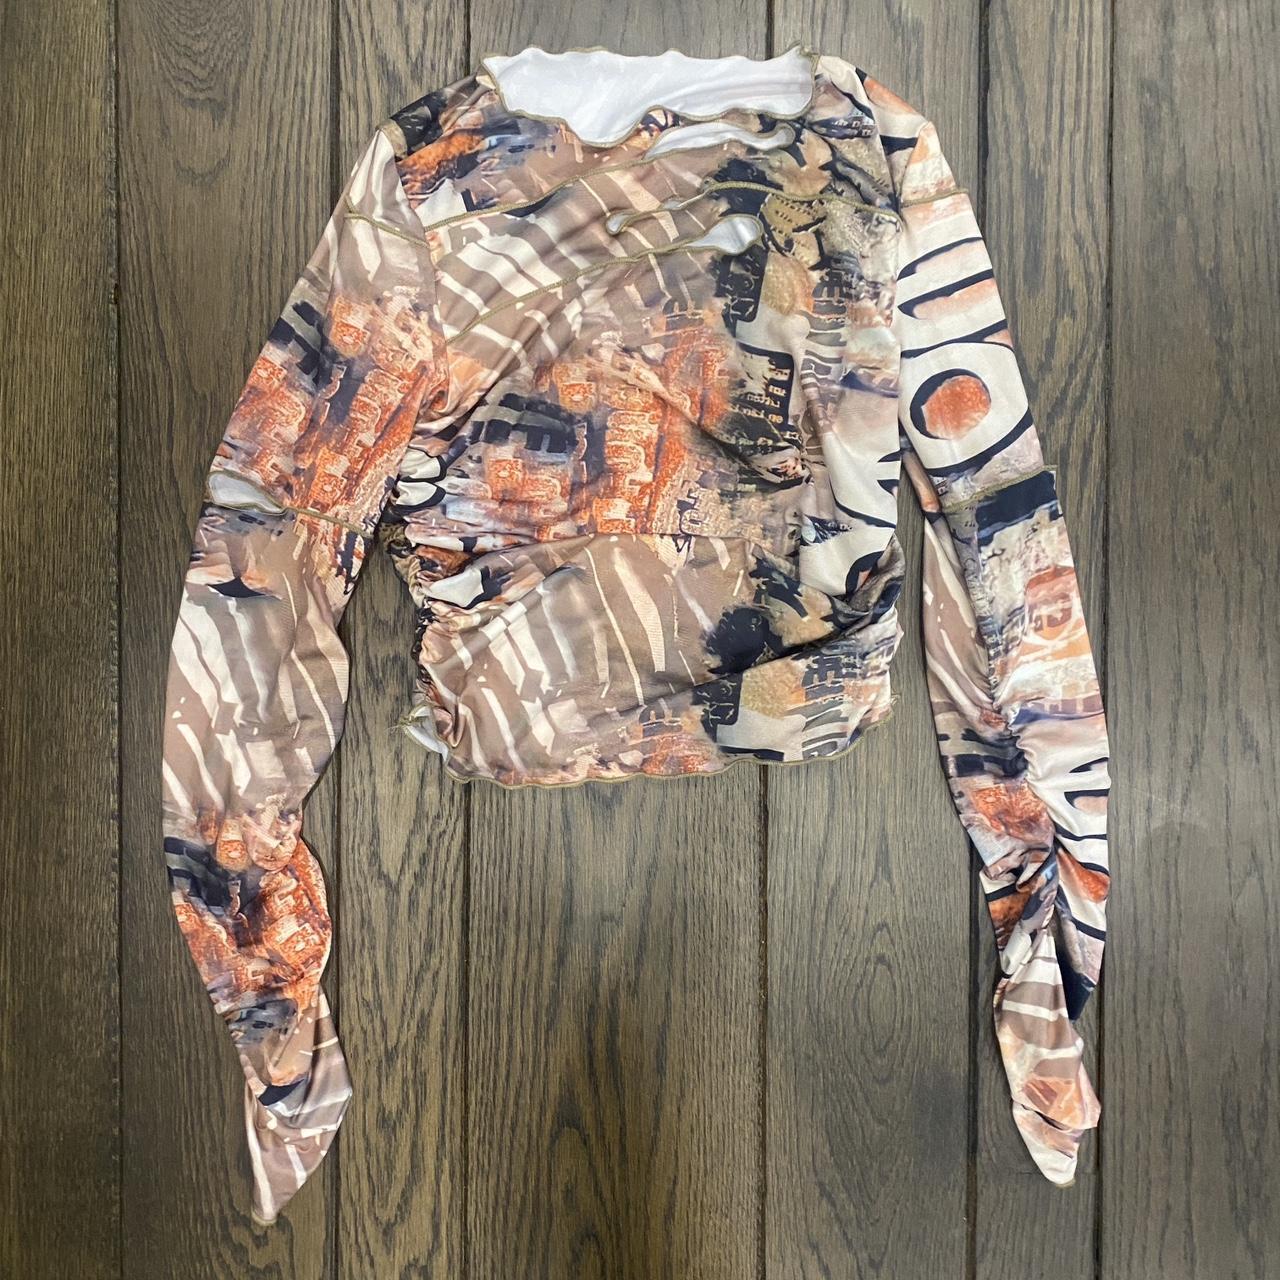 Y2K stretch printed top size xs/s🌷, No brand or size...